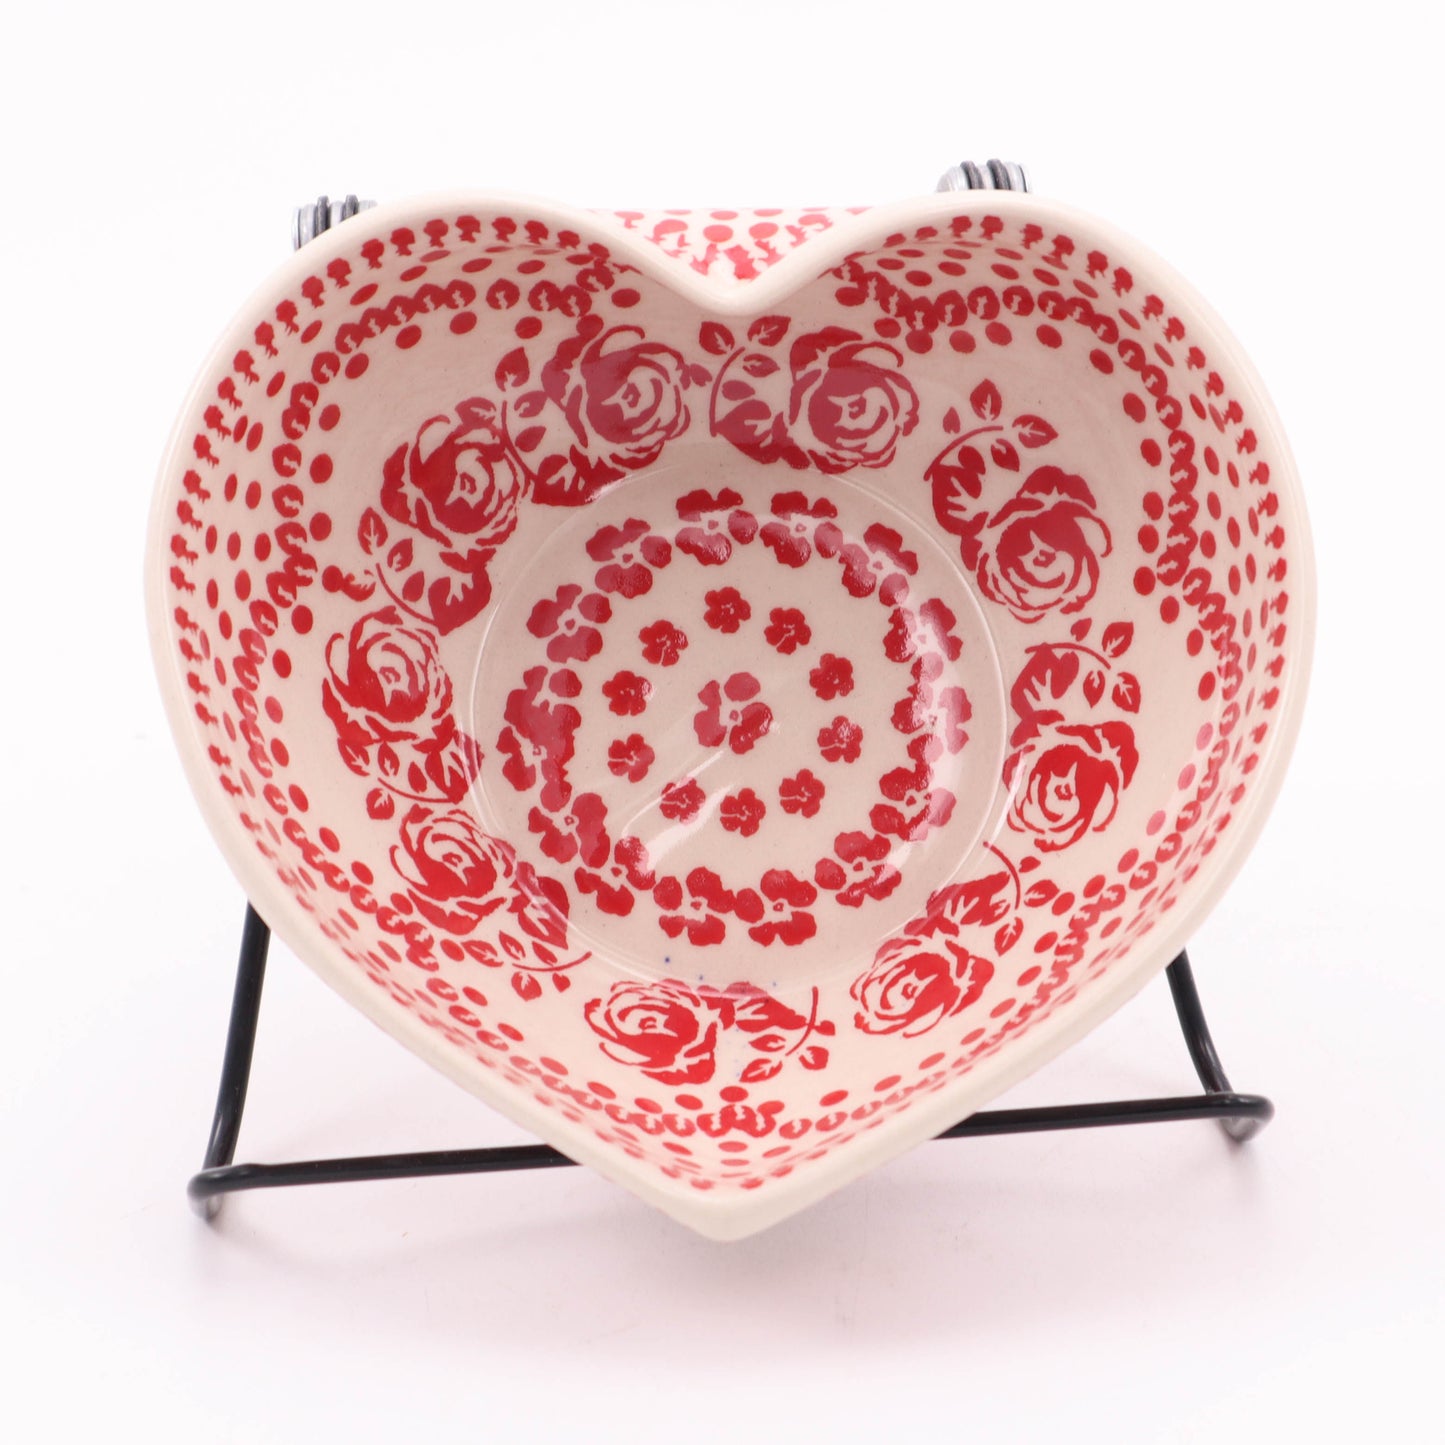 5"x6" Heart Bowl. Pattern: Country Rose